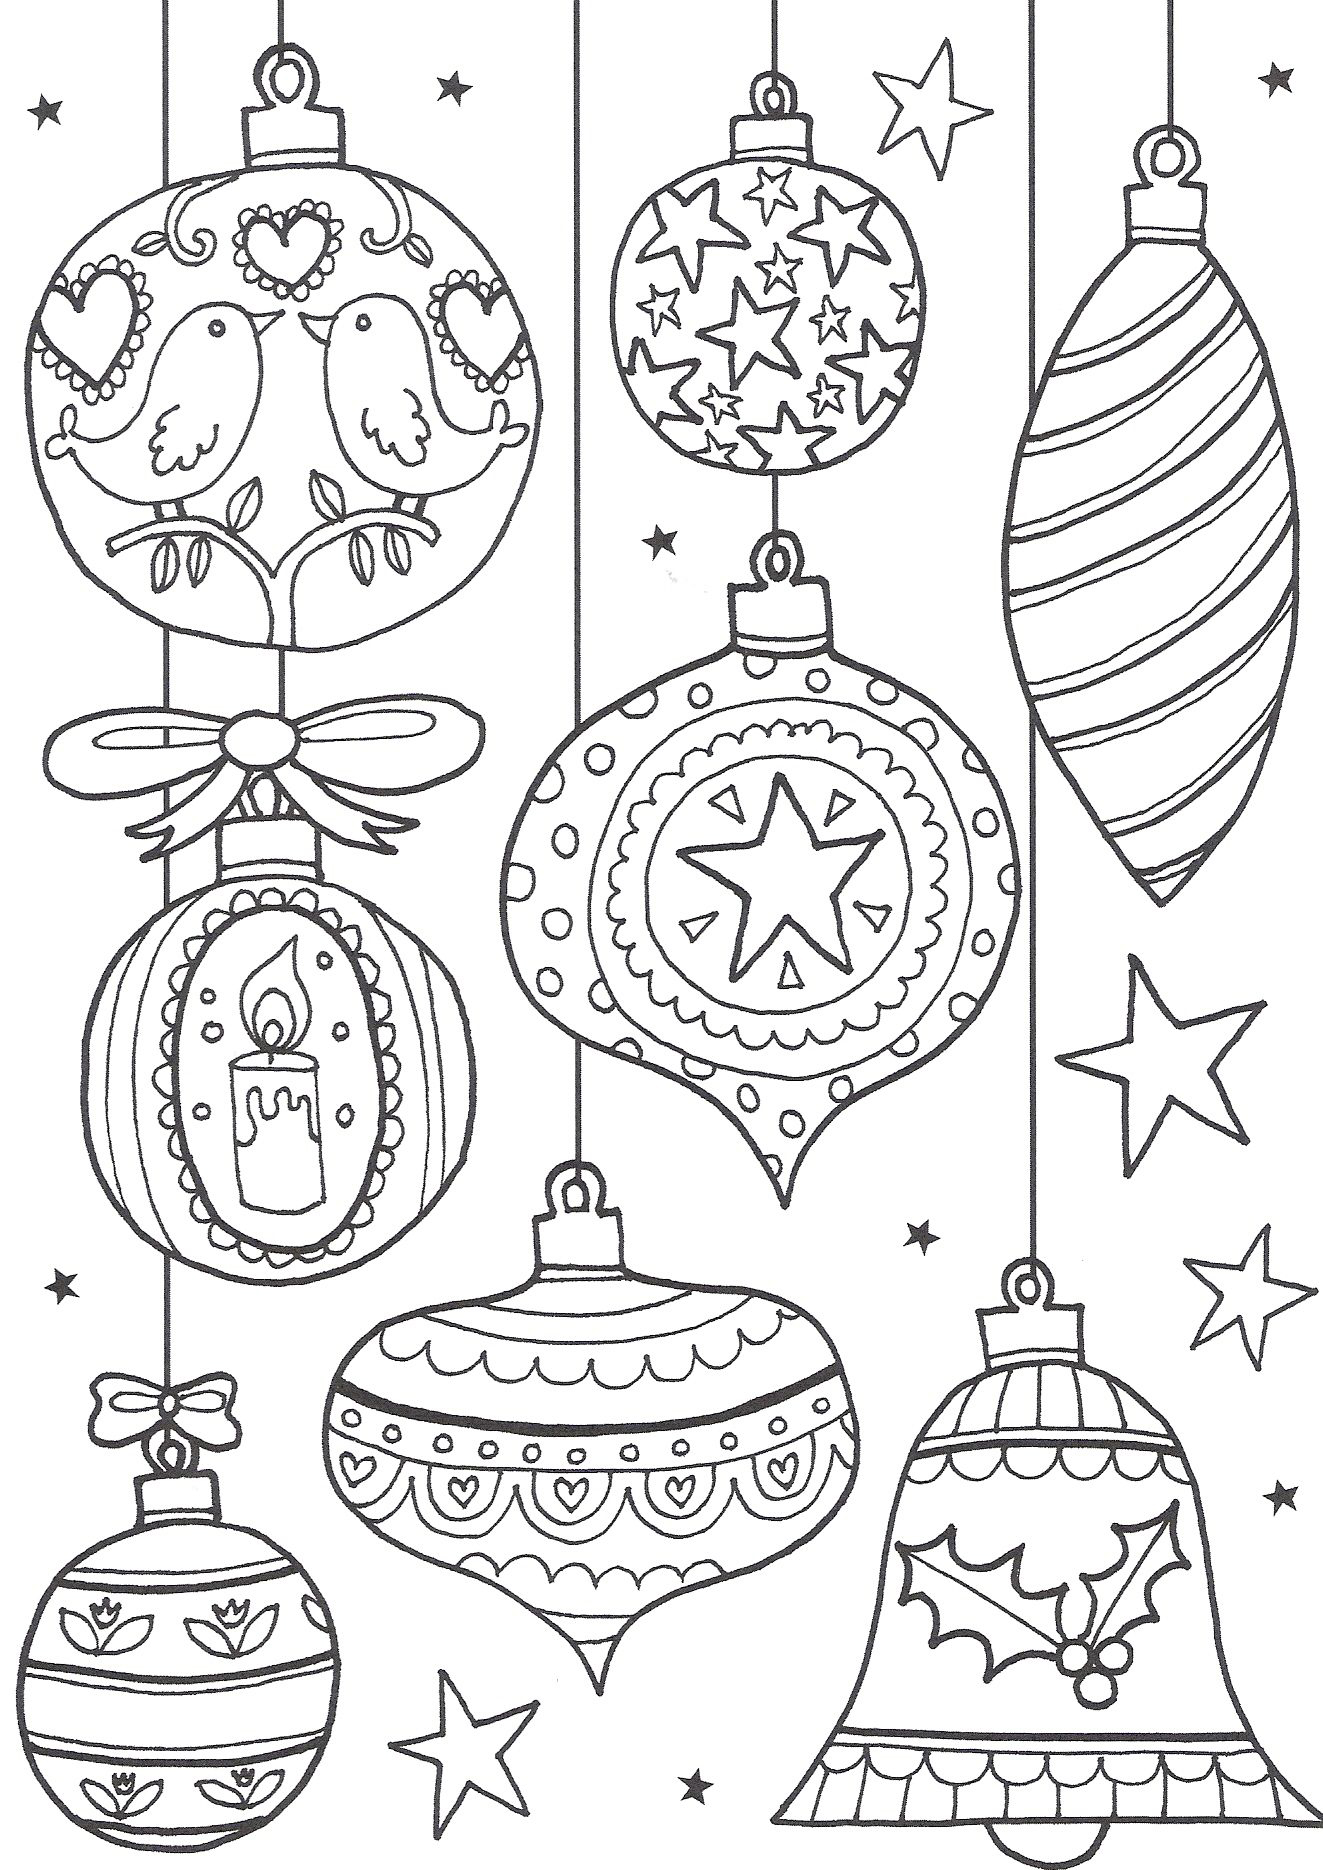 Detailed Christmas Coloring Pages | Coloring Page Blog